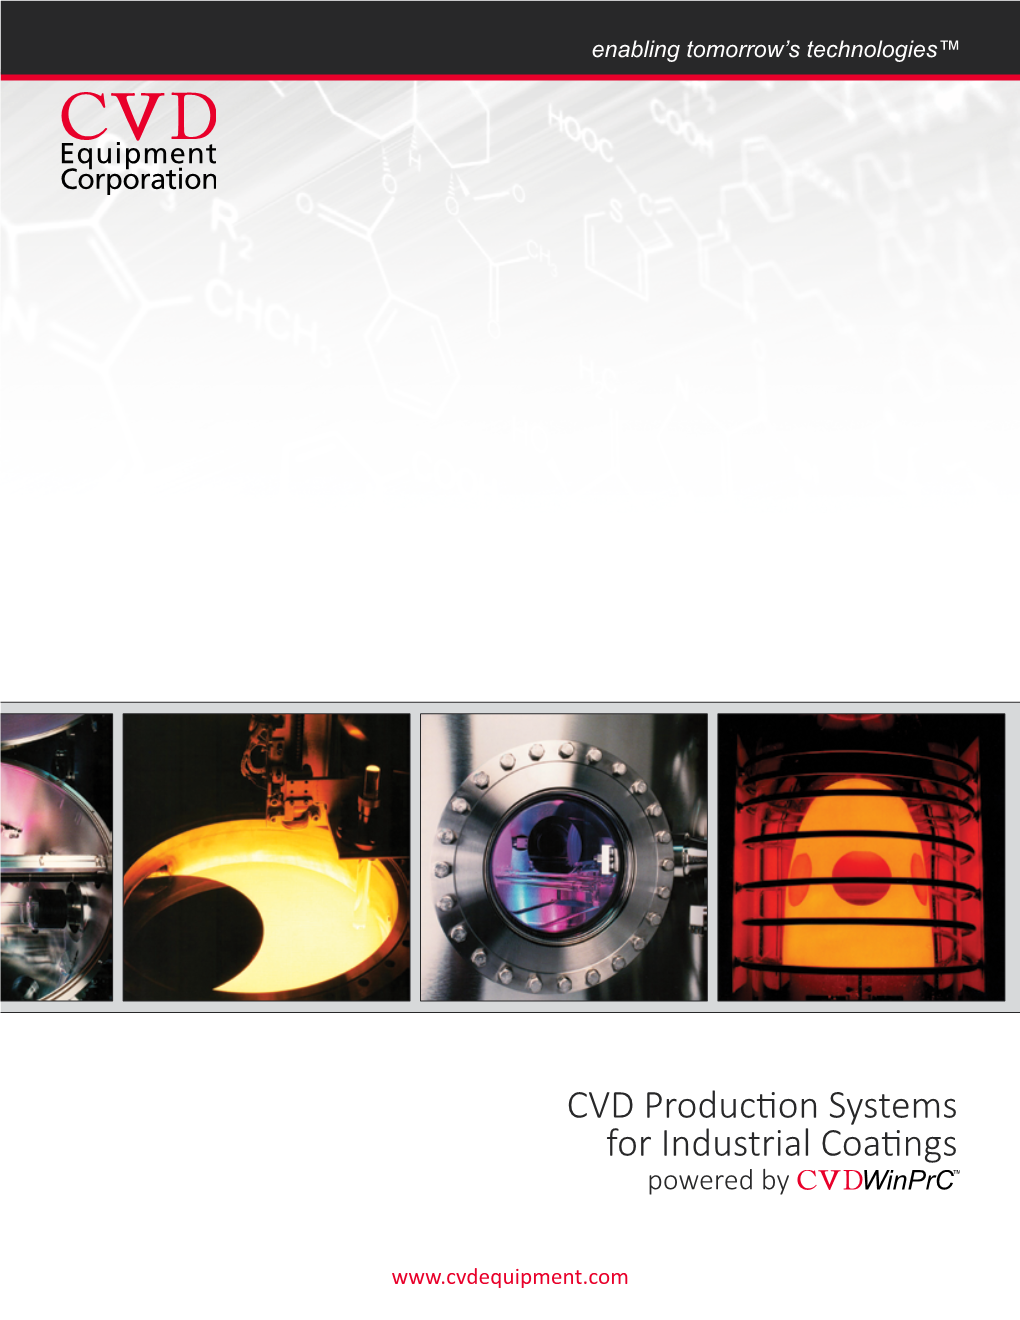 CVD Production Systems for Industrial Coatings Powered By